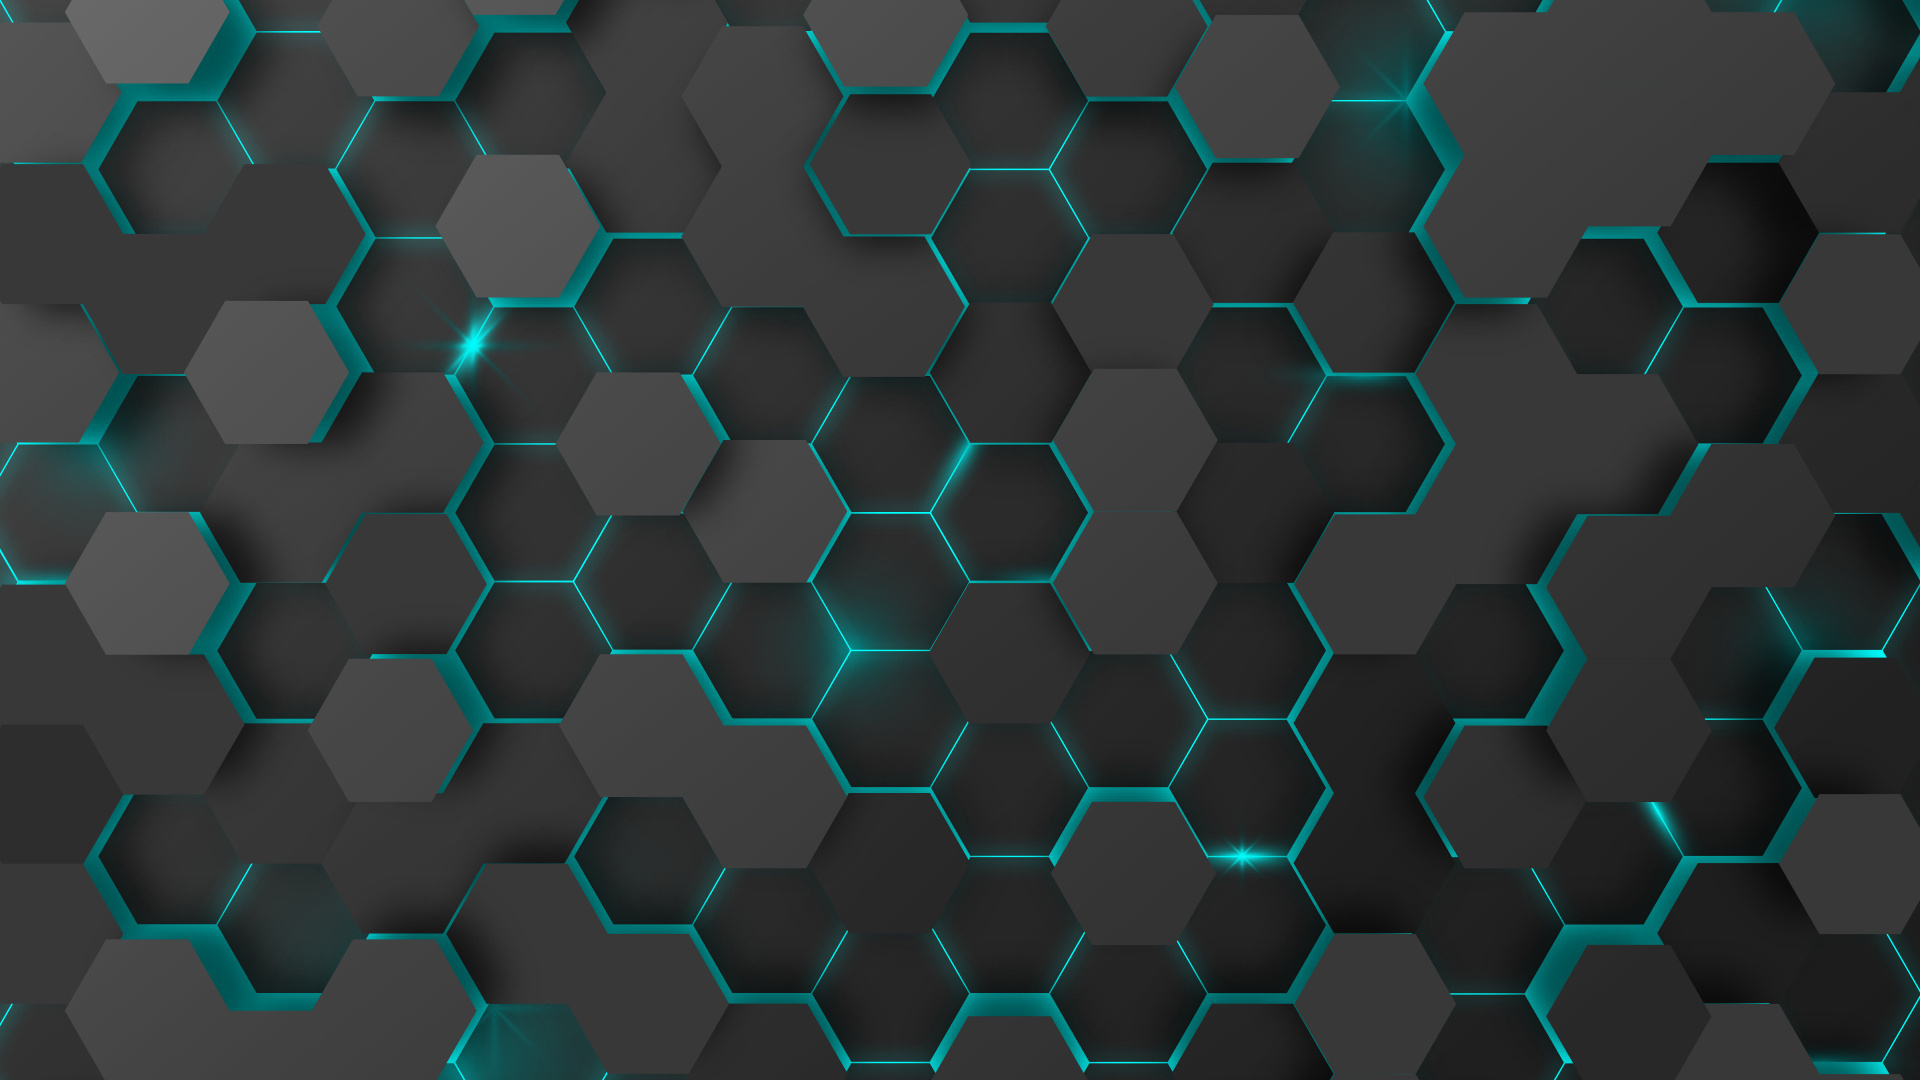 Honeycomb, Full HD, High-definition wallpapers, Free images, 1920x1080 Full HD Desktop